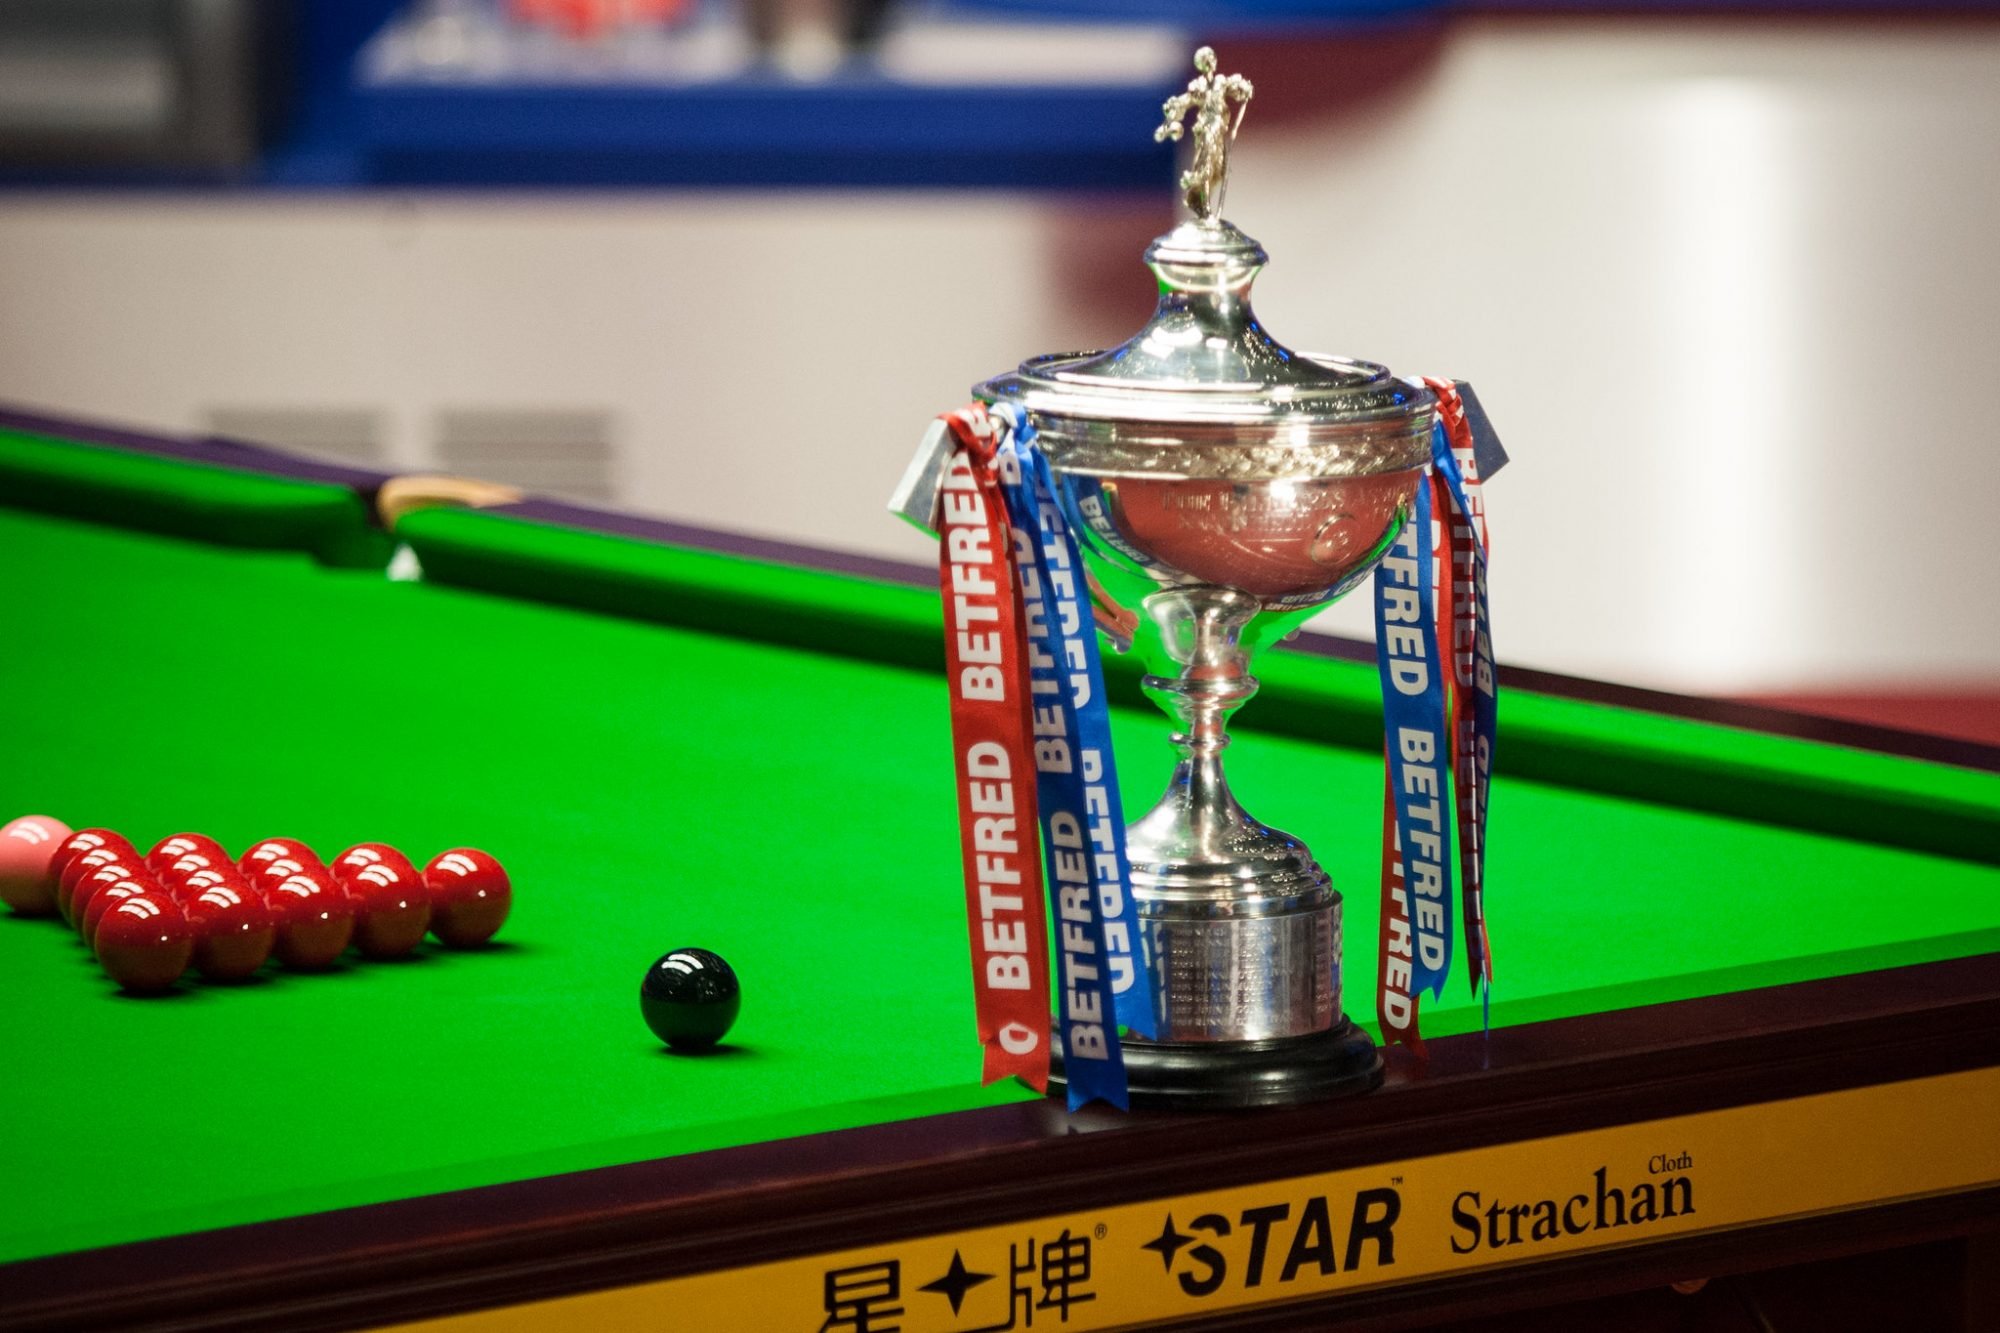 Mark Selby vs Shaun Murphy live stream How to watch the World Snooker Championship 2021 final online from anywhere Android Central